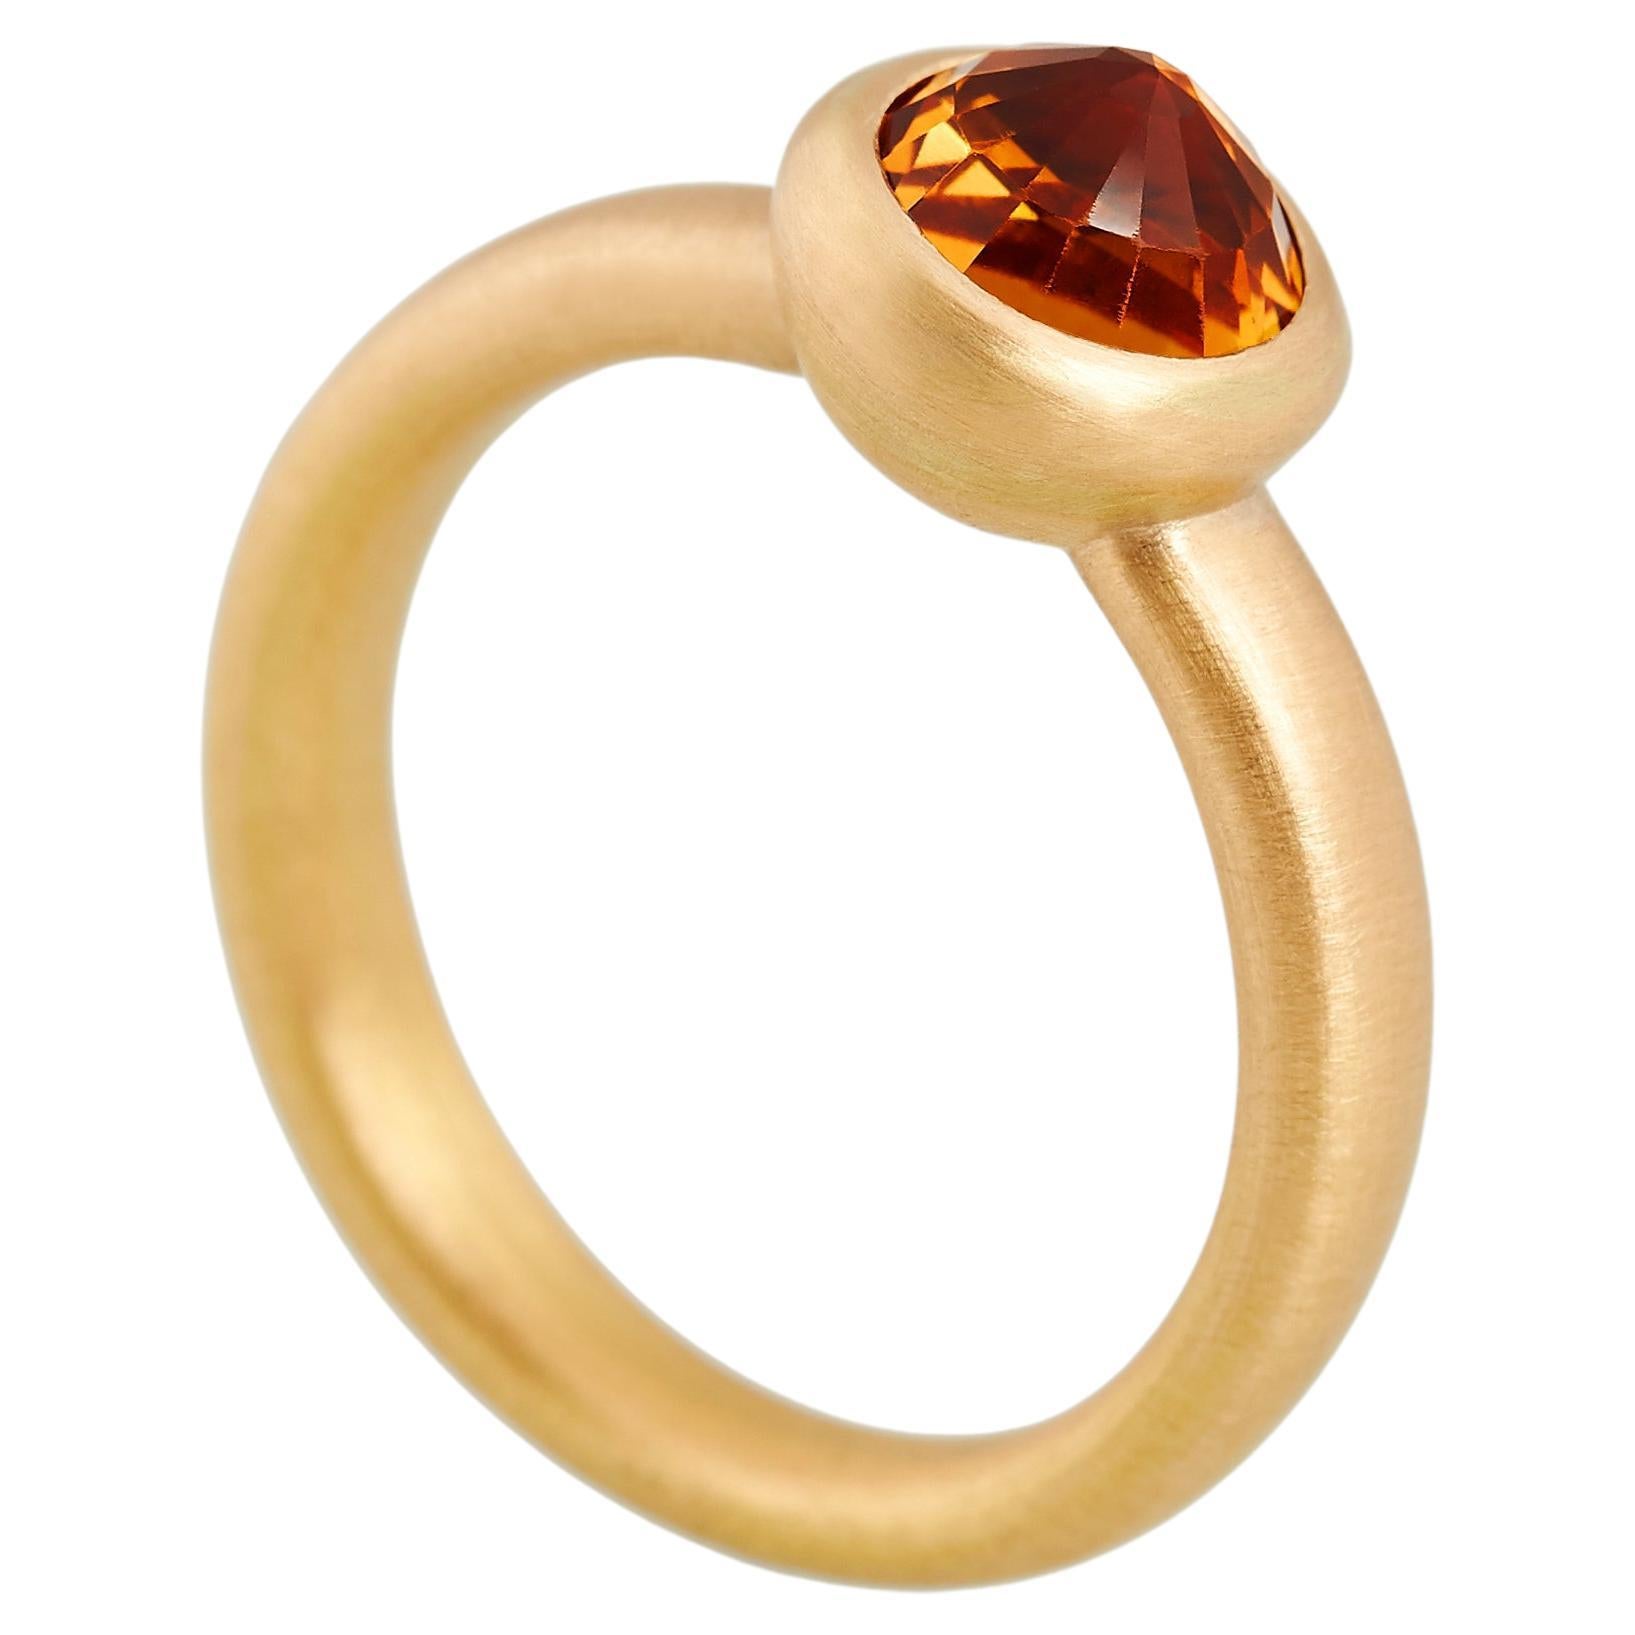 Faceted Citrine Ring, 22 Carat Gold For Sale